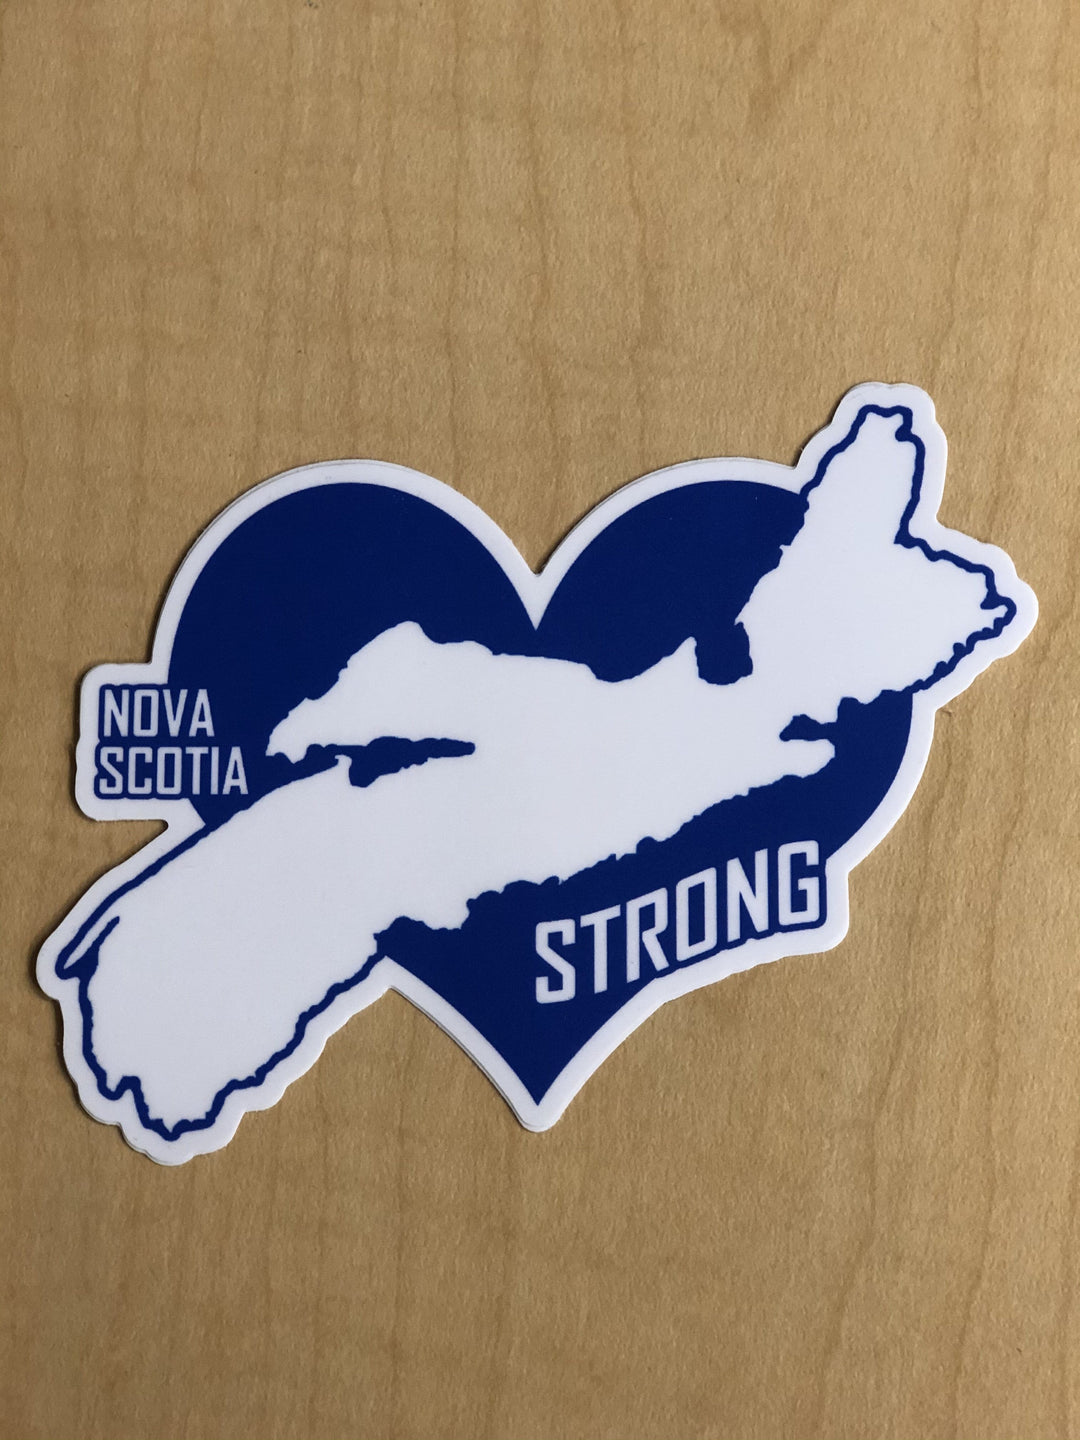 Take It Outside NS Strong Sticker Large (4.5" x 3.5")